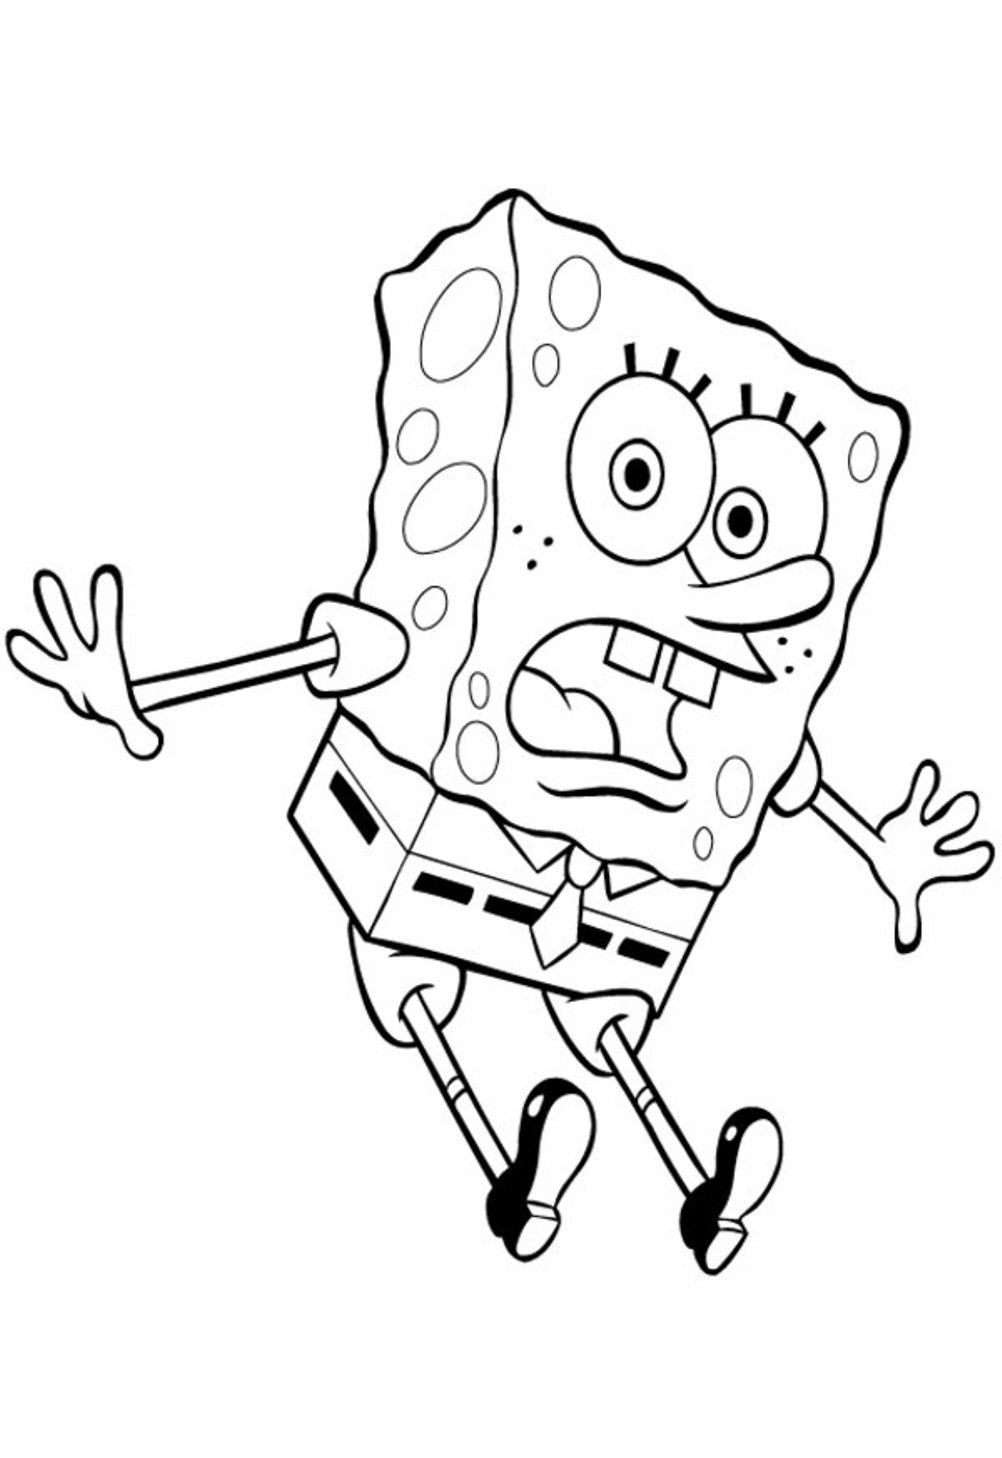 Coloring Pages Spongebob For Kids Coloring Page